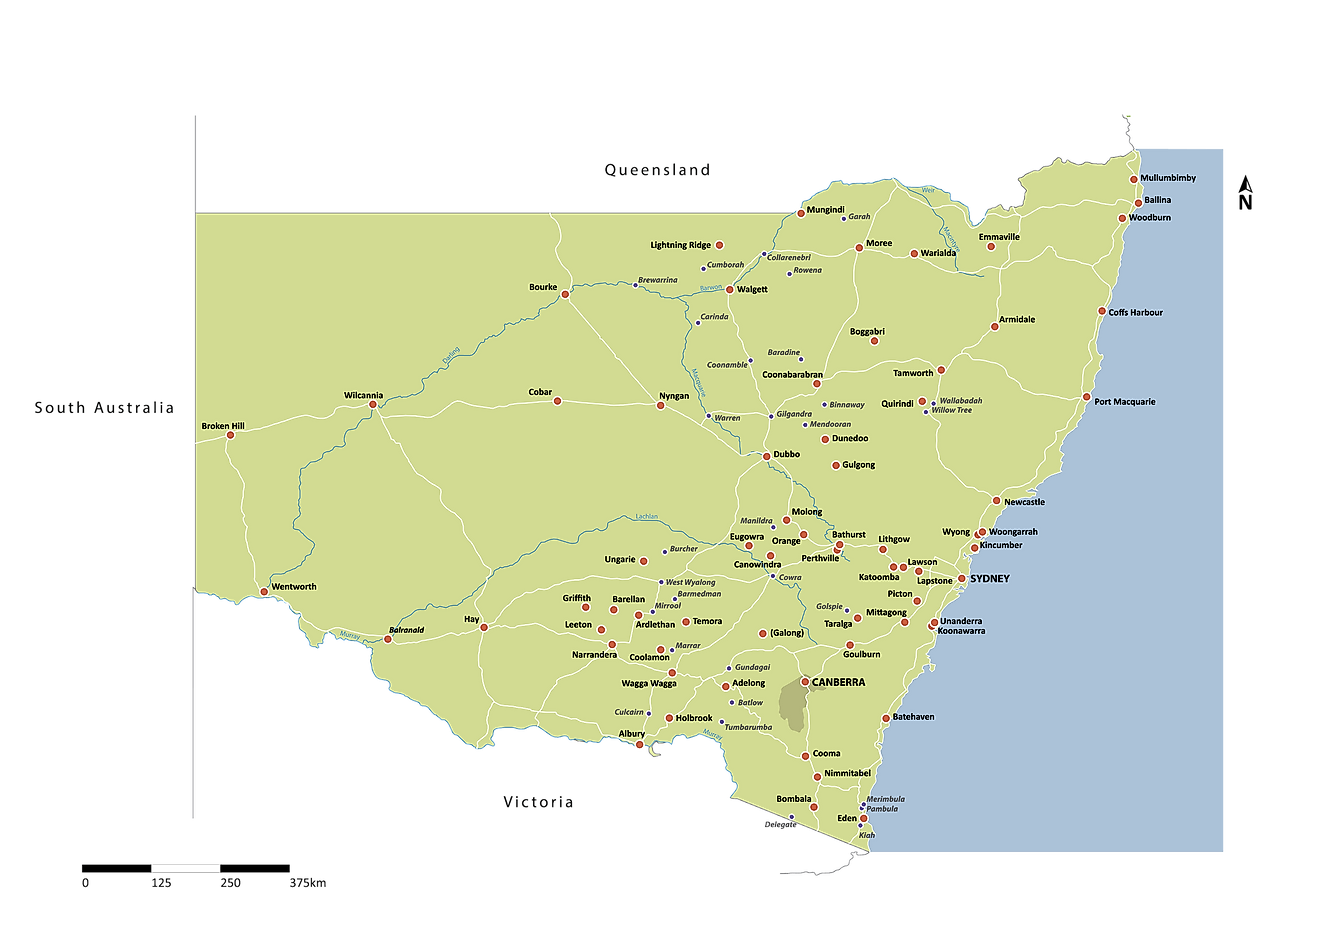 Administrative Map of New South Wales showing its cities and towns including its capital city - Sydney